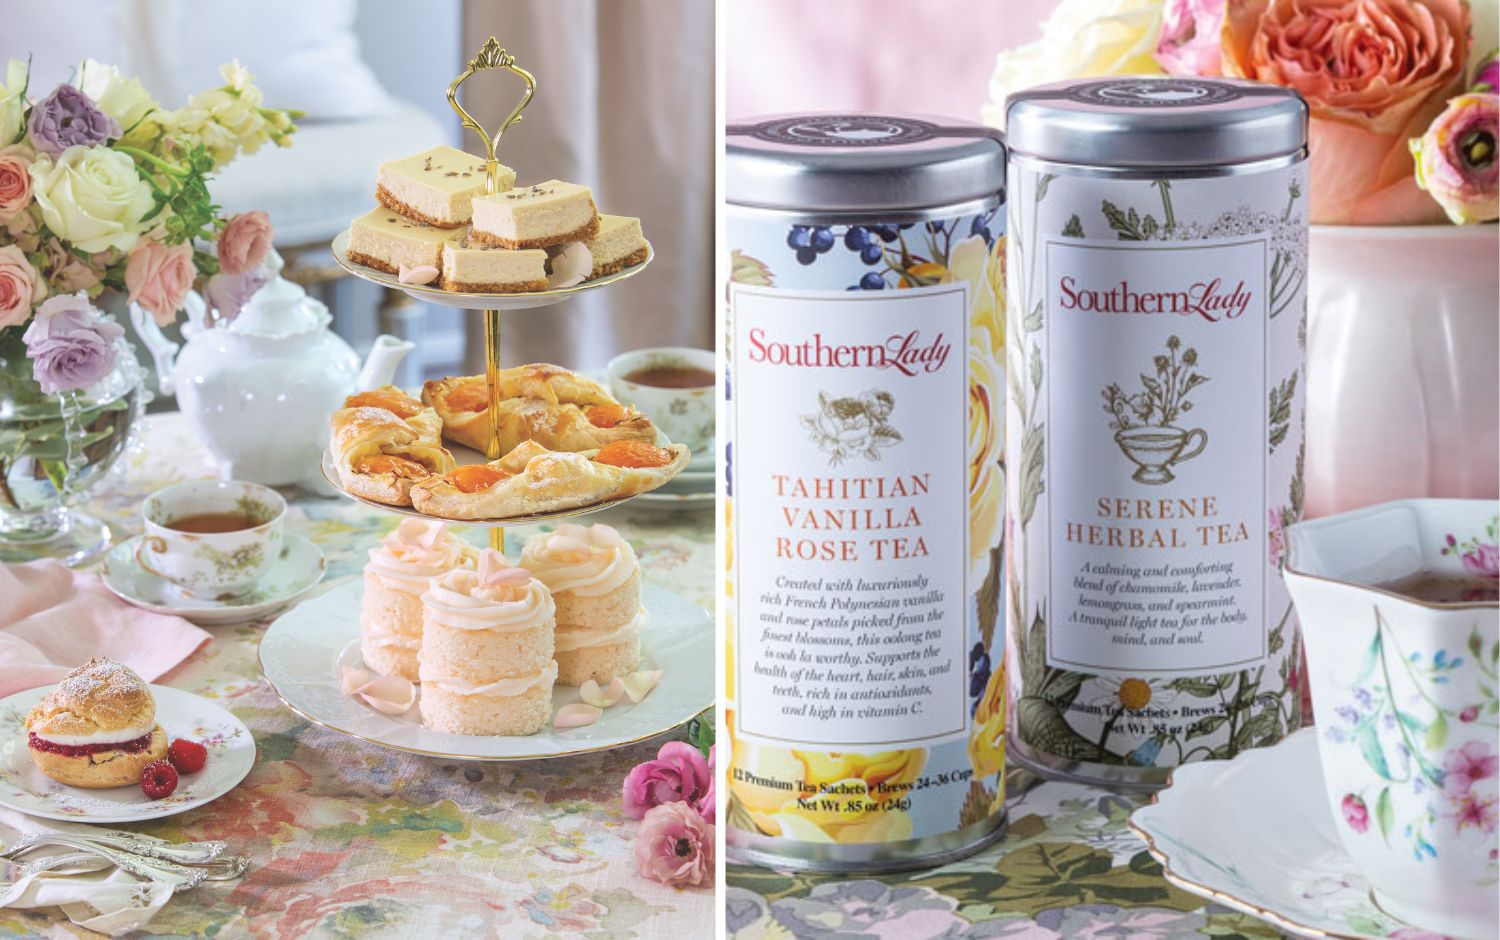 Dainty Treats to Pair with Southern Lady's Exclusive Specialty Teas